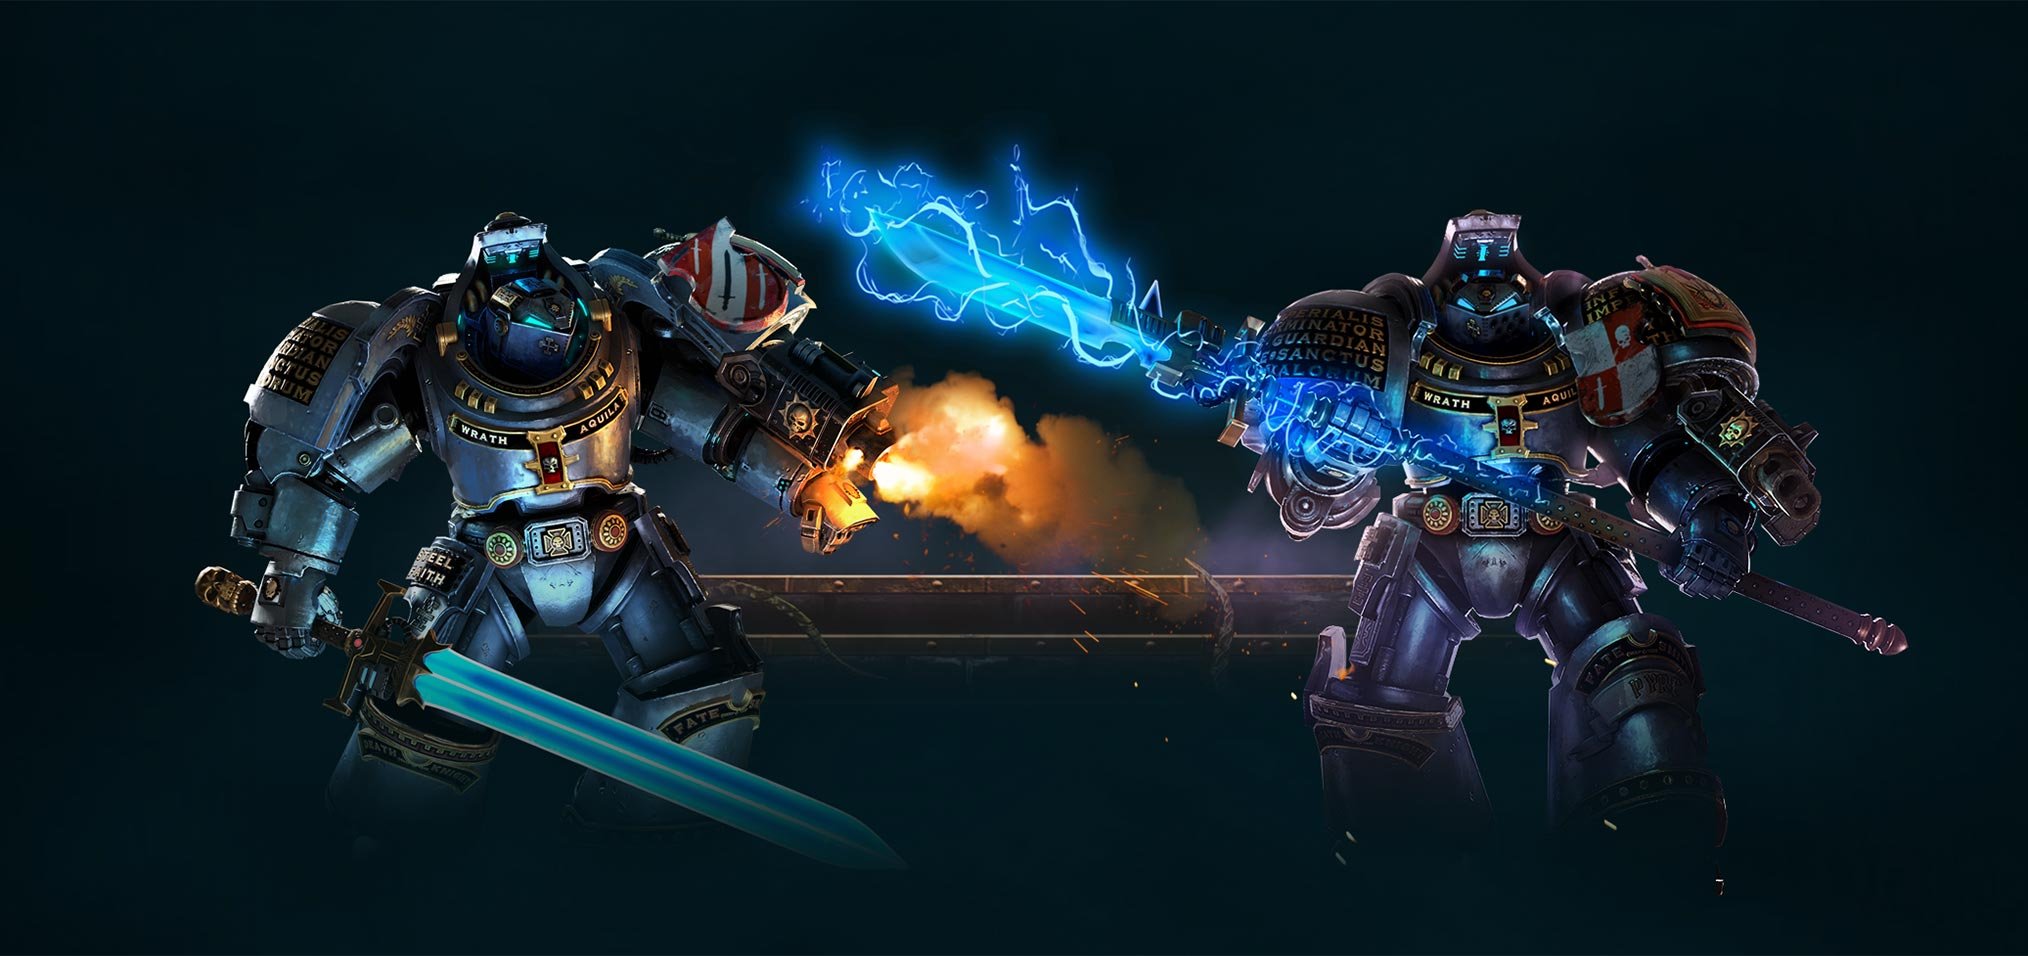 Warhammer 40,000: Chaos Gate - Daemonhunters download the last version for iphone